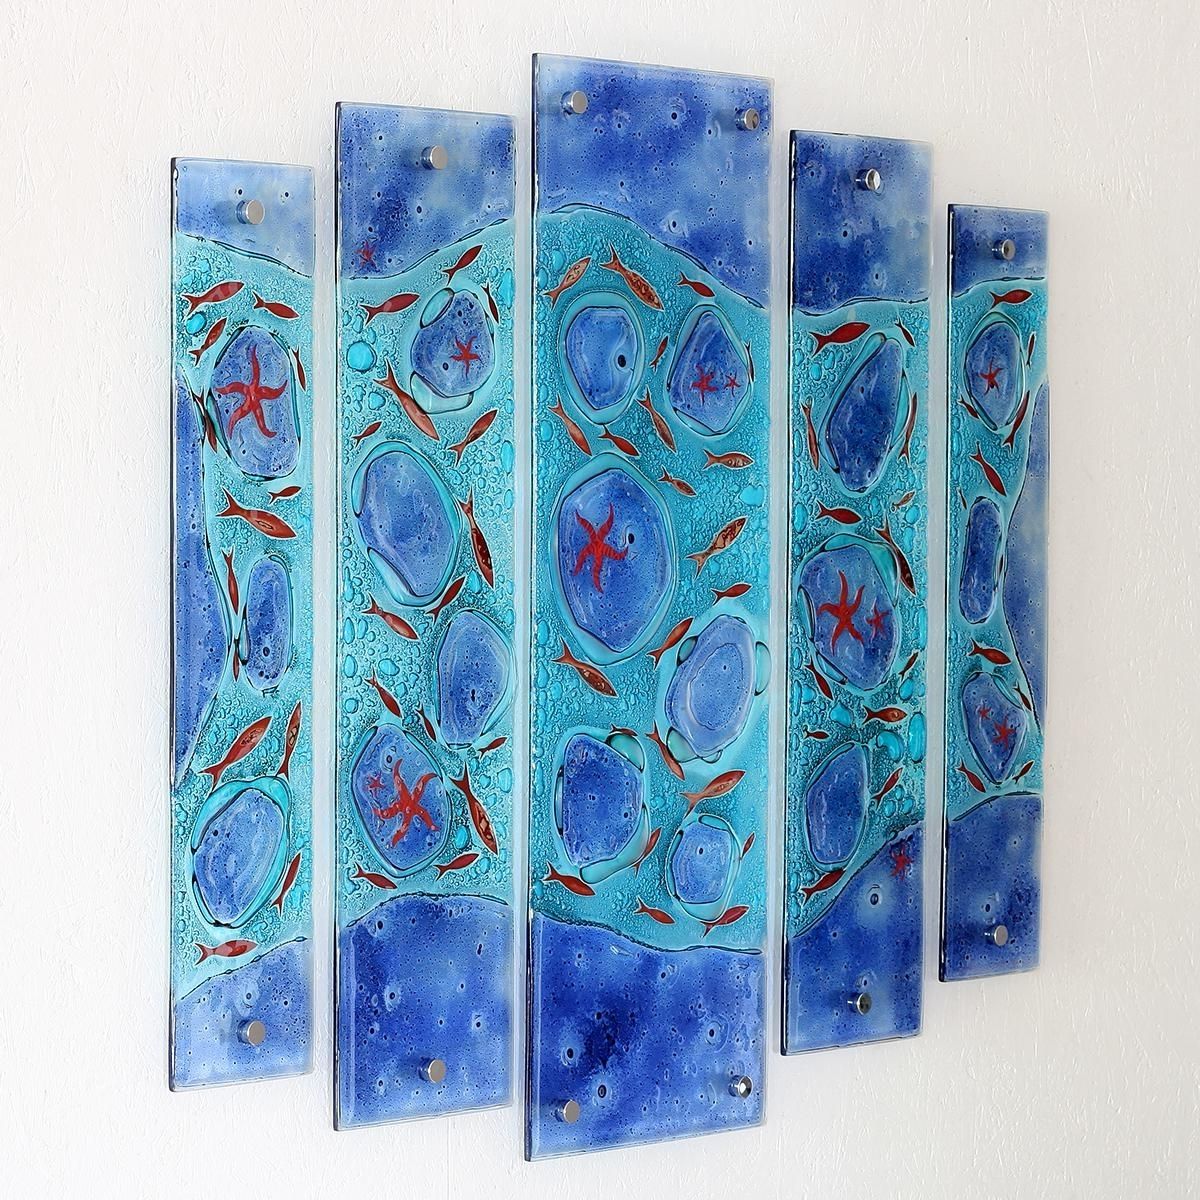 Famous Rockpool Quintych Fused Glass Wall Artjo Downs – Jo Downs With Regard To Cheap Fused Glass Wall Art (View 11 of 15)